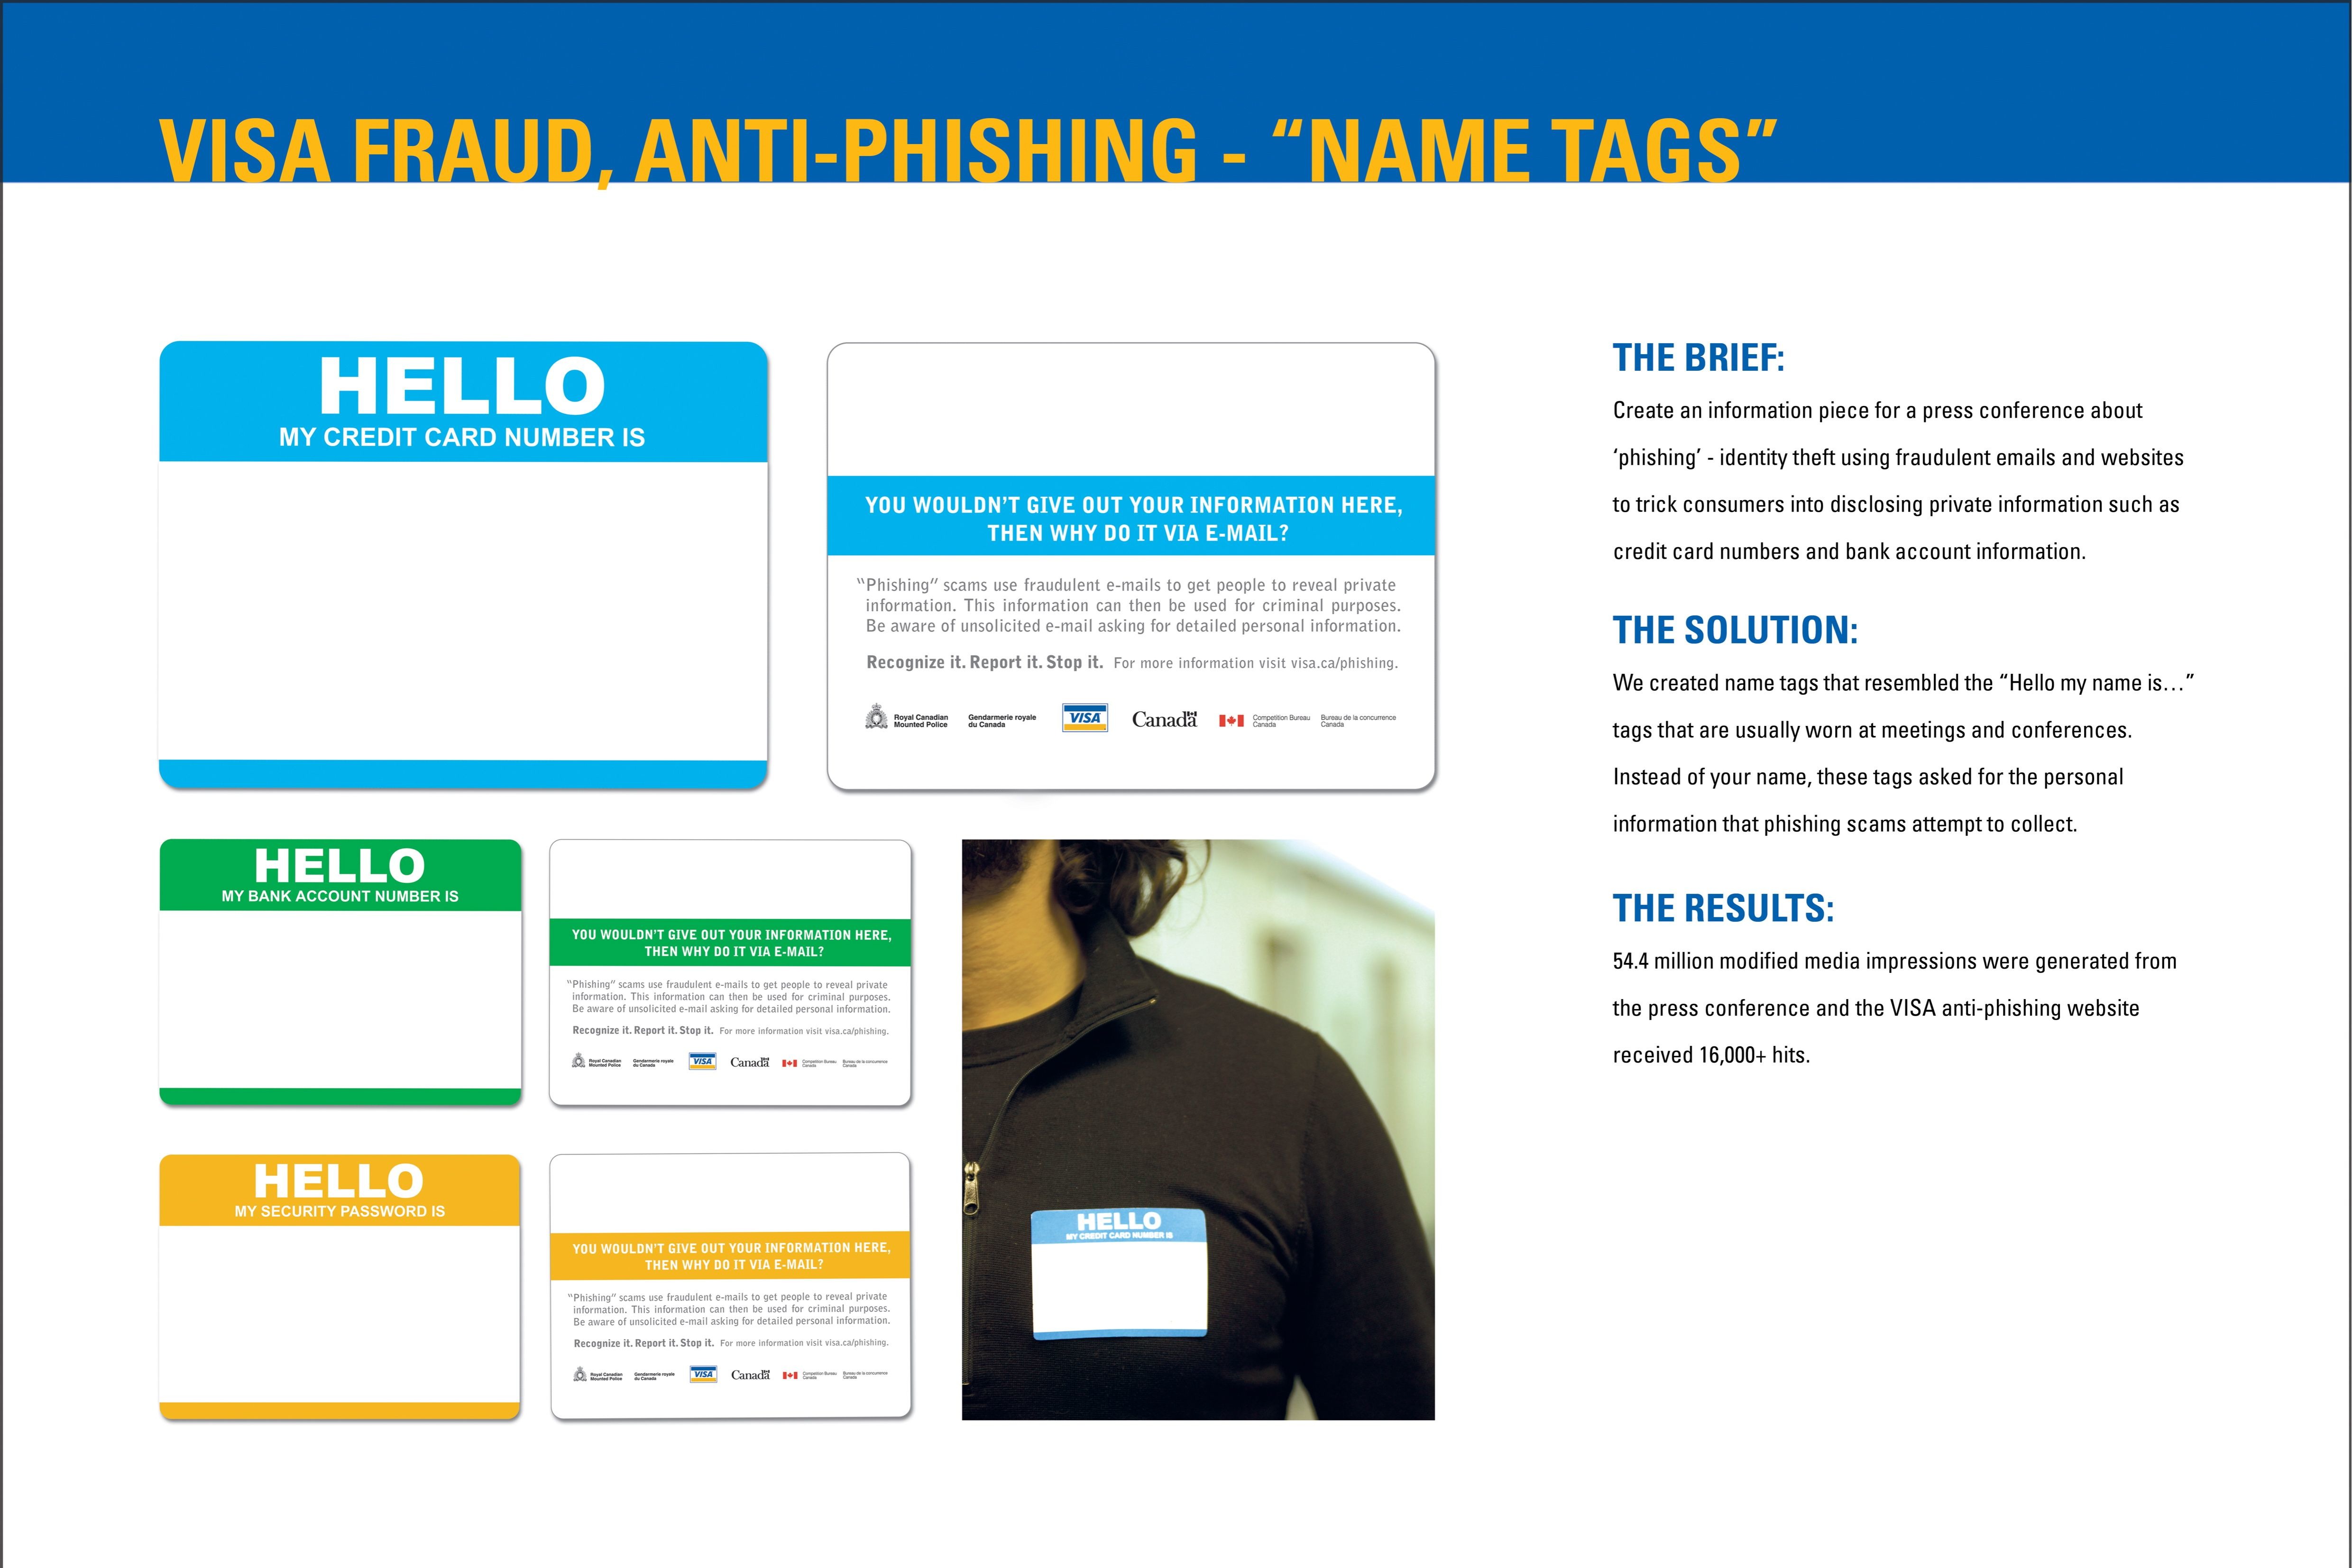 FRAUD PREVENTION CAMPAIGN